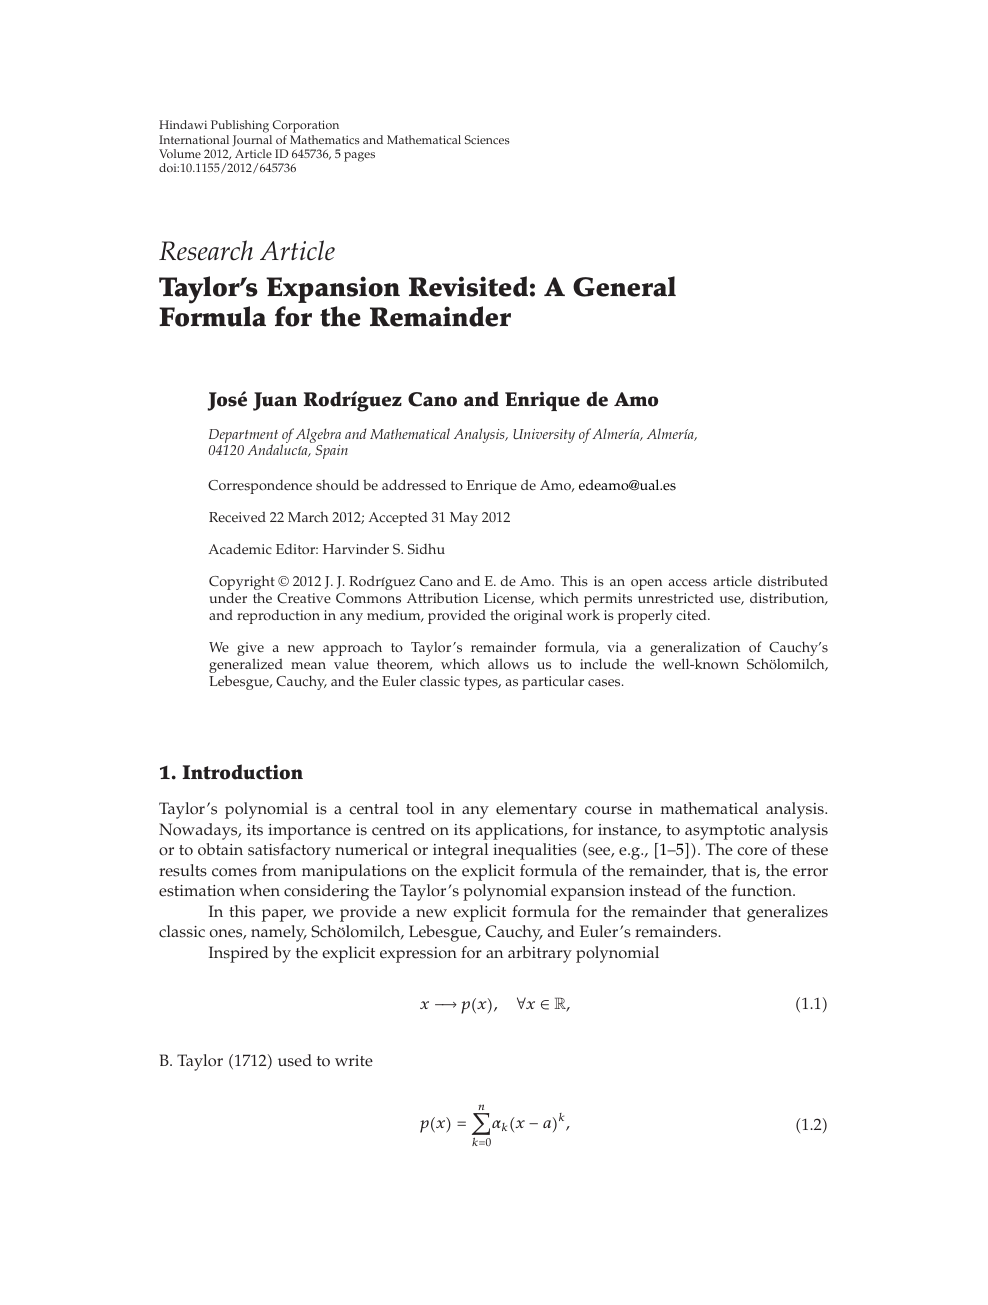 Taylor S Expansion Revisited A General Formula For The Remainder Topic Of Research Paper In Mathematics Download Scholarly Article Pdf And Read For Free On Cyberleninka Open Science Hub